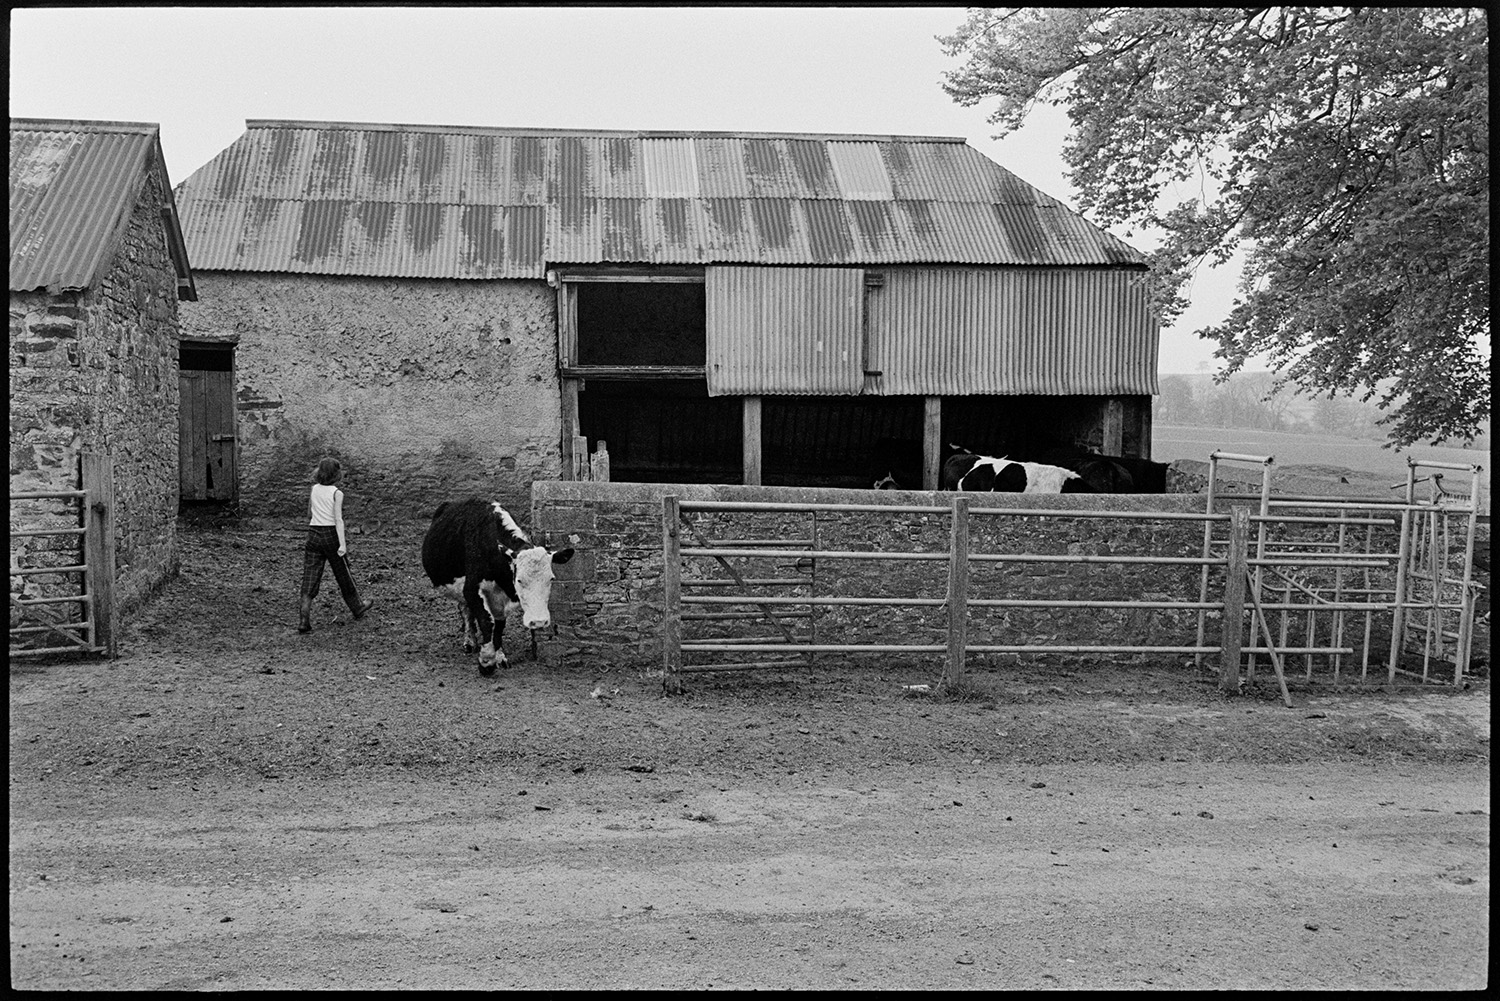 Farmer and daughter taking cows out to pasture past barns, dog playing. 
[A girl walking into a farmyard with cows at Gosses, Hollocombe. A cob barn with a corrugated iron roof is in the background and a cattle crush can be seen in the foreground.]